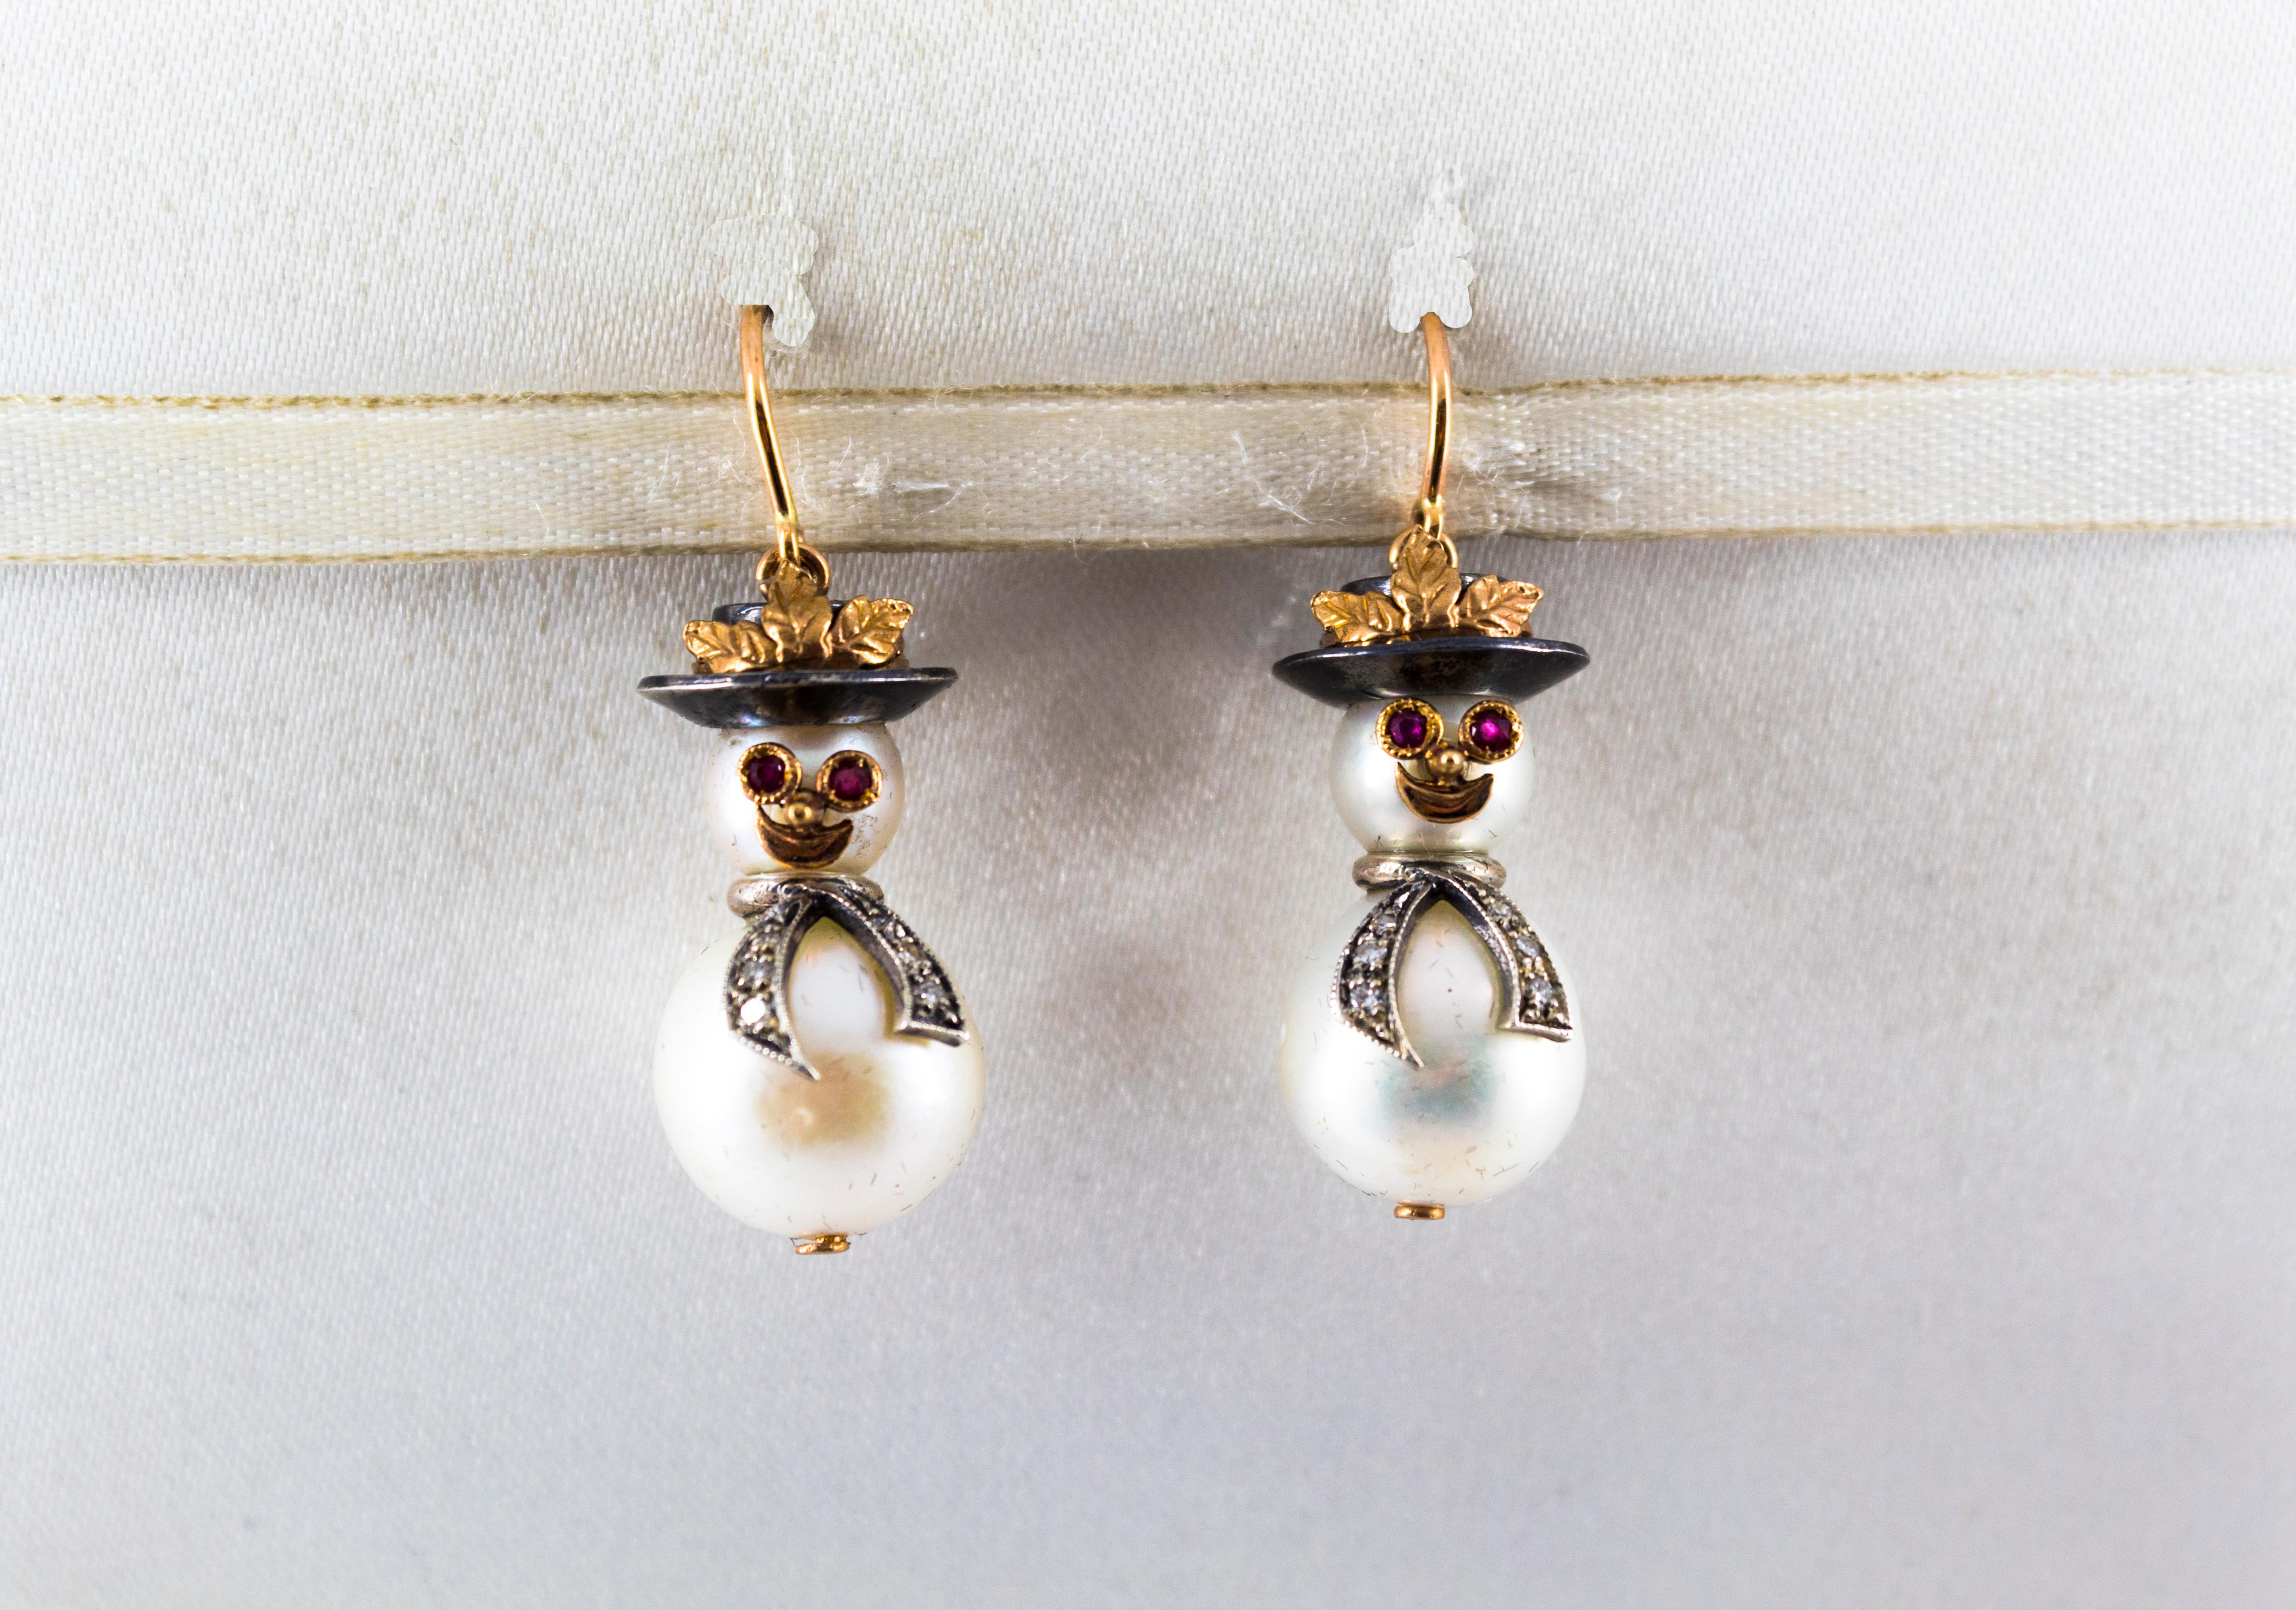 These Earrings are made of 9K Yellow Gold and Sterling Silver.
These Earrings have 0.15 Carats of White Modern Round Cut Diamonds.
These Earrings have 0.10 Carats of Rubies.
These Earrings have also two Indonesian Pearls and two Japanese